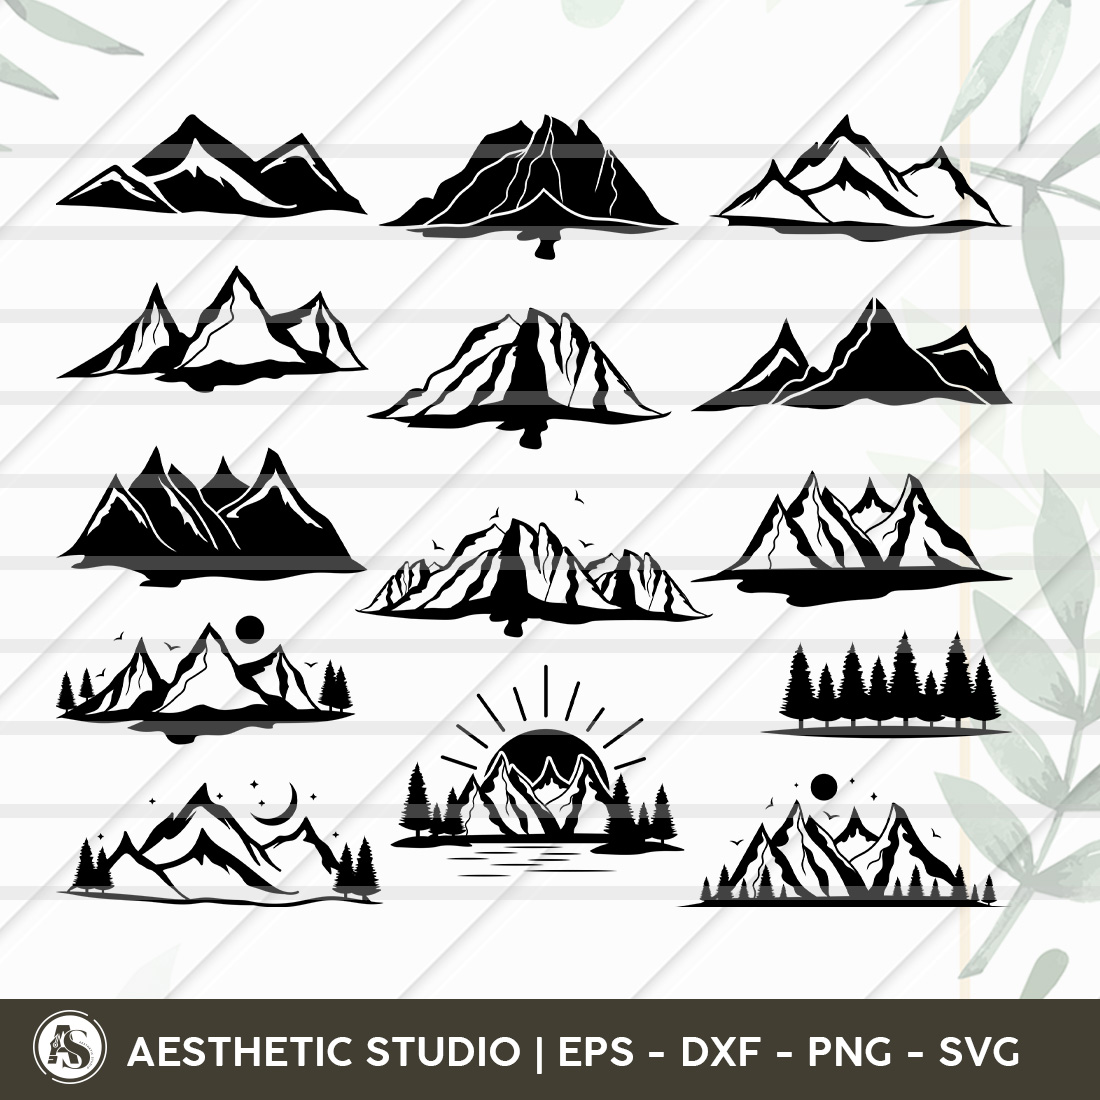 Mountains SVG, Mountain And Trees Svg, Forest Svg Cricut, Mountains Clipart Svg, Trees, Silhouette Svg Cut File Svg, Travel Svg, Landscape svg, Outdoor Svg, Mountains Bundle, Svg, Eps, Dxf, Png, Cut file cover image.